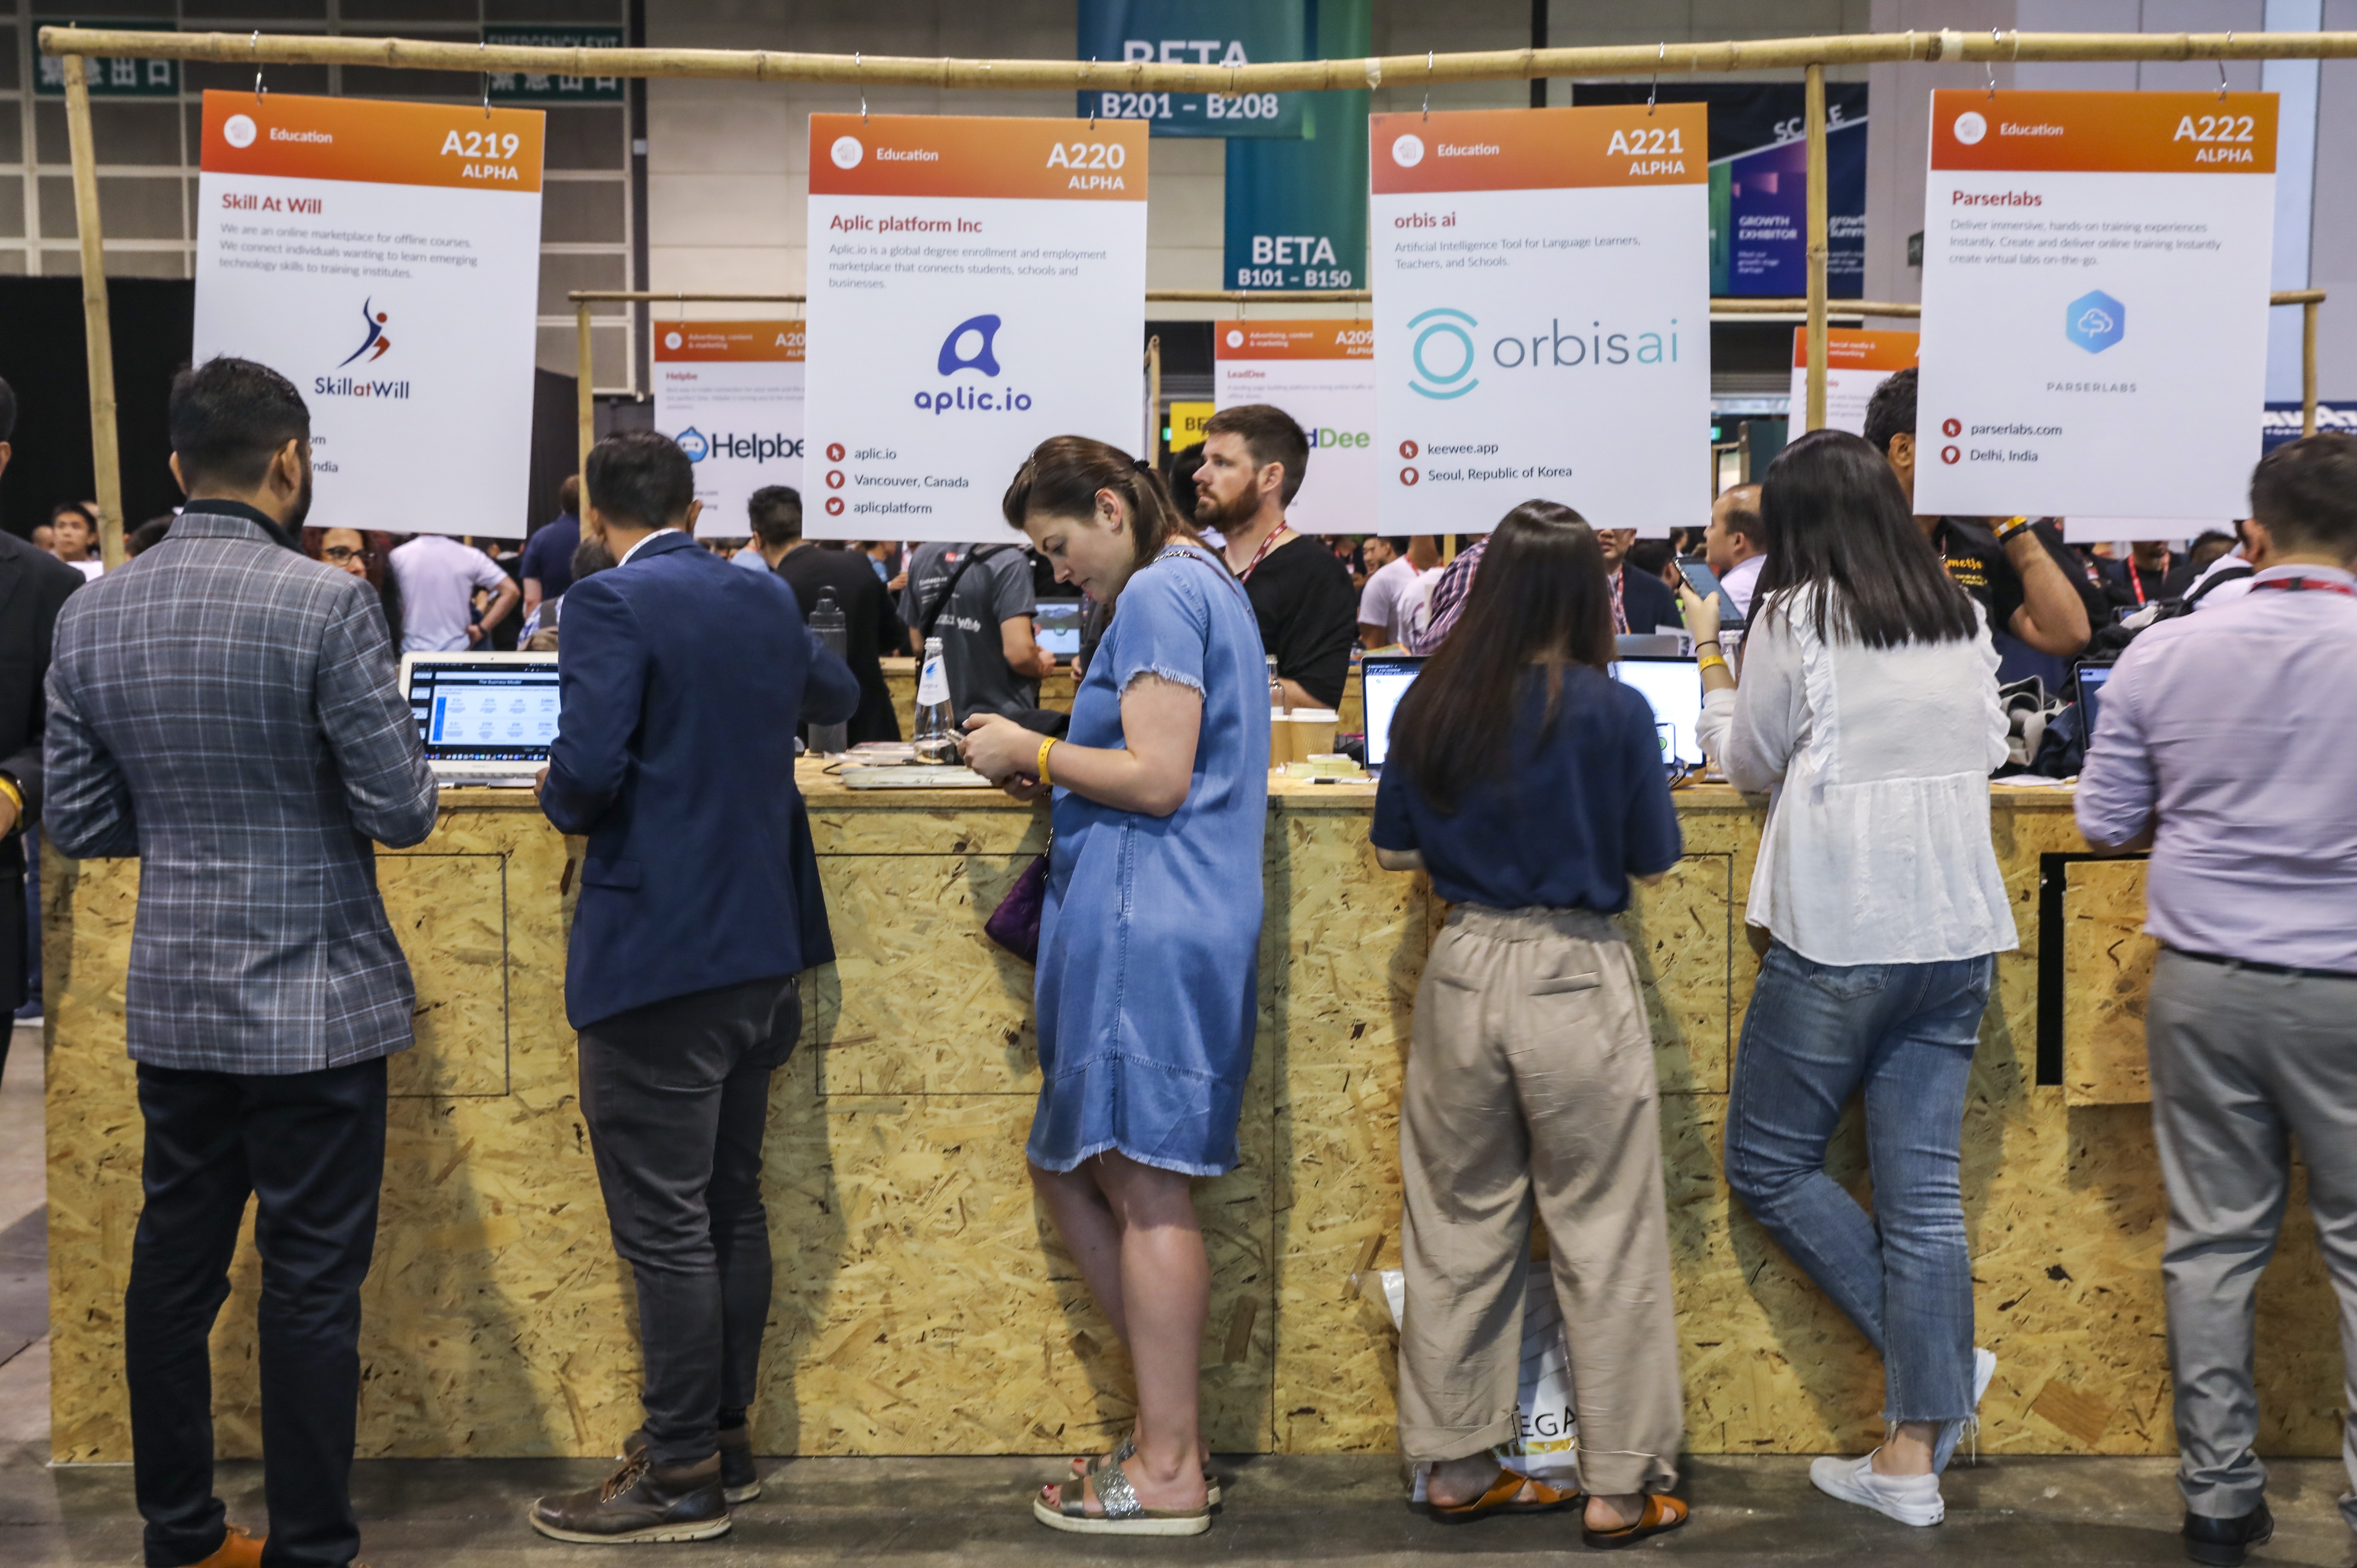 Exhibitors attending the RISE Conference in 2019 at the Hong Kong Convention and Exhibition Centre in Wan Chai. Photo: K. Y. Cheng